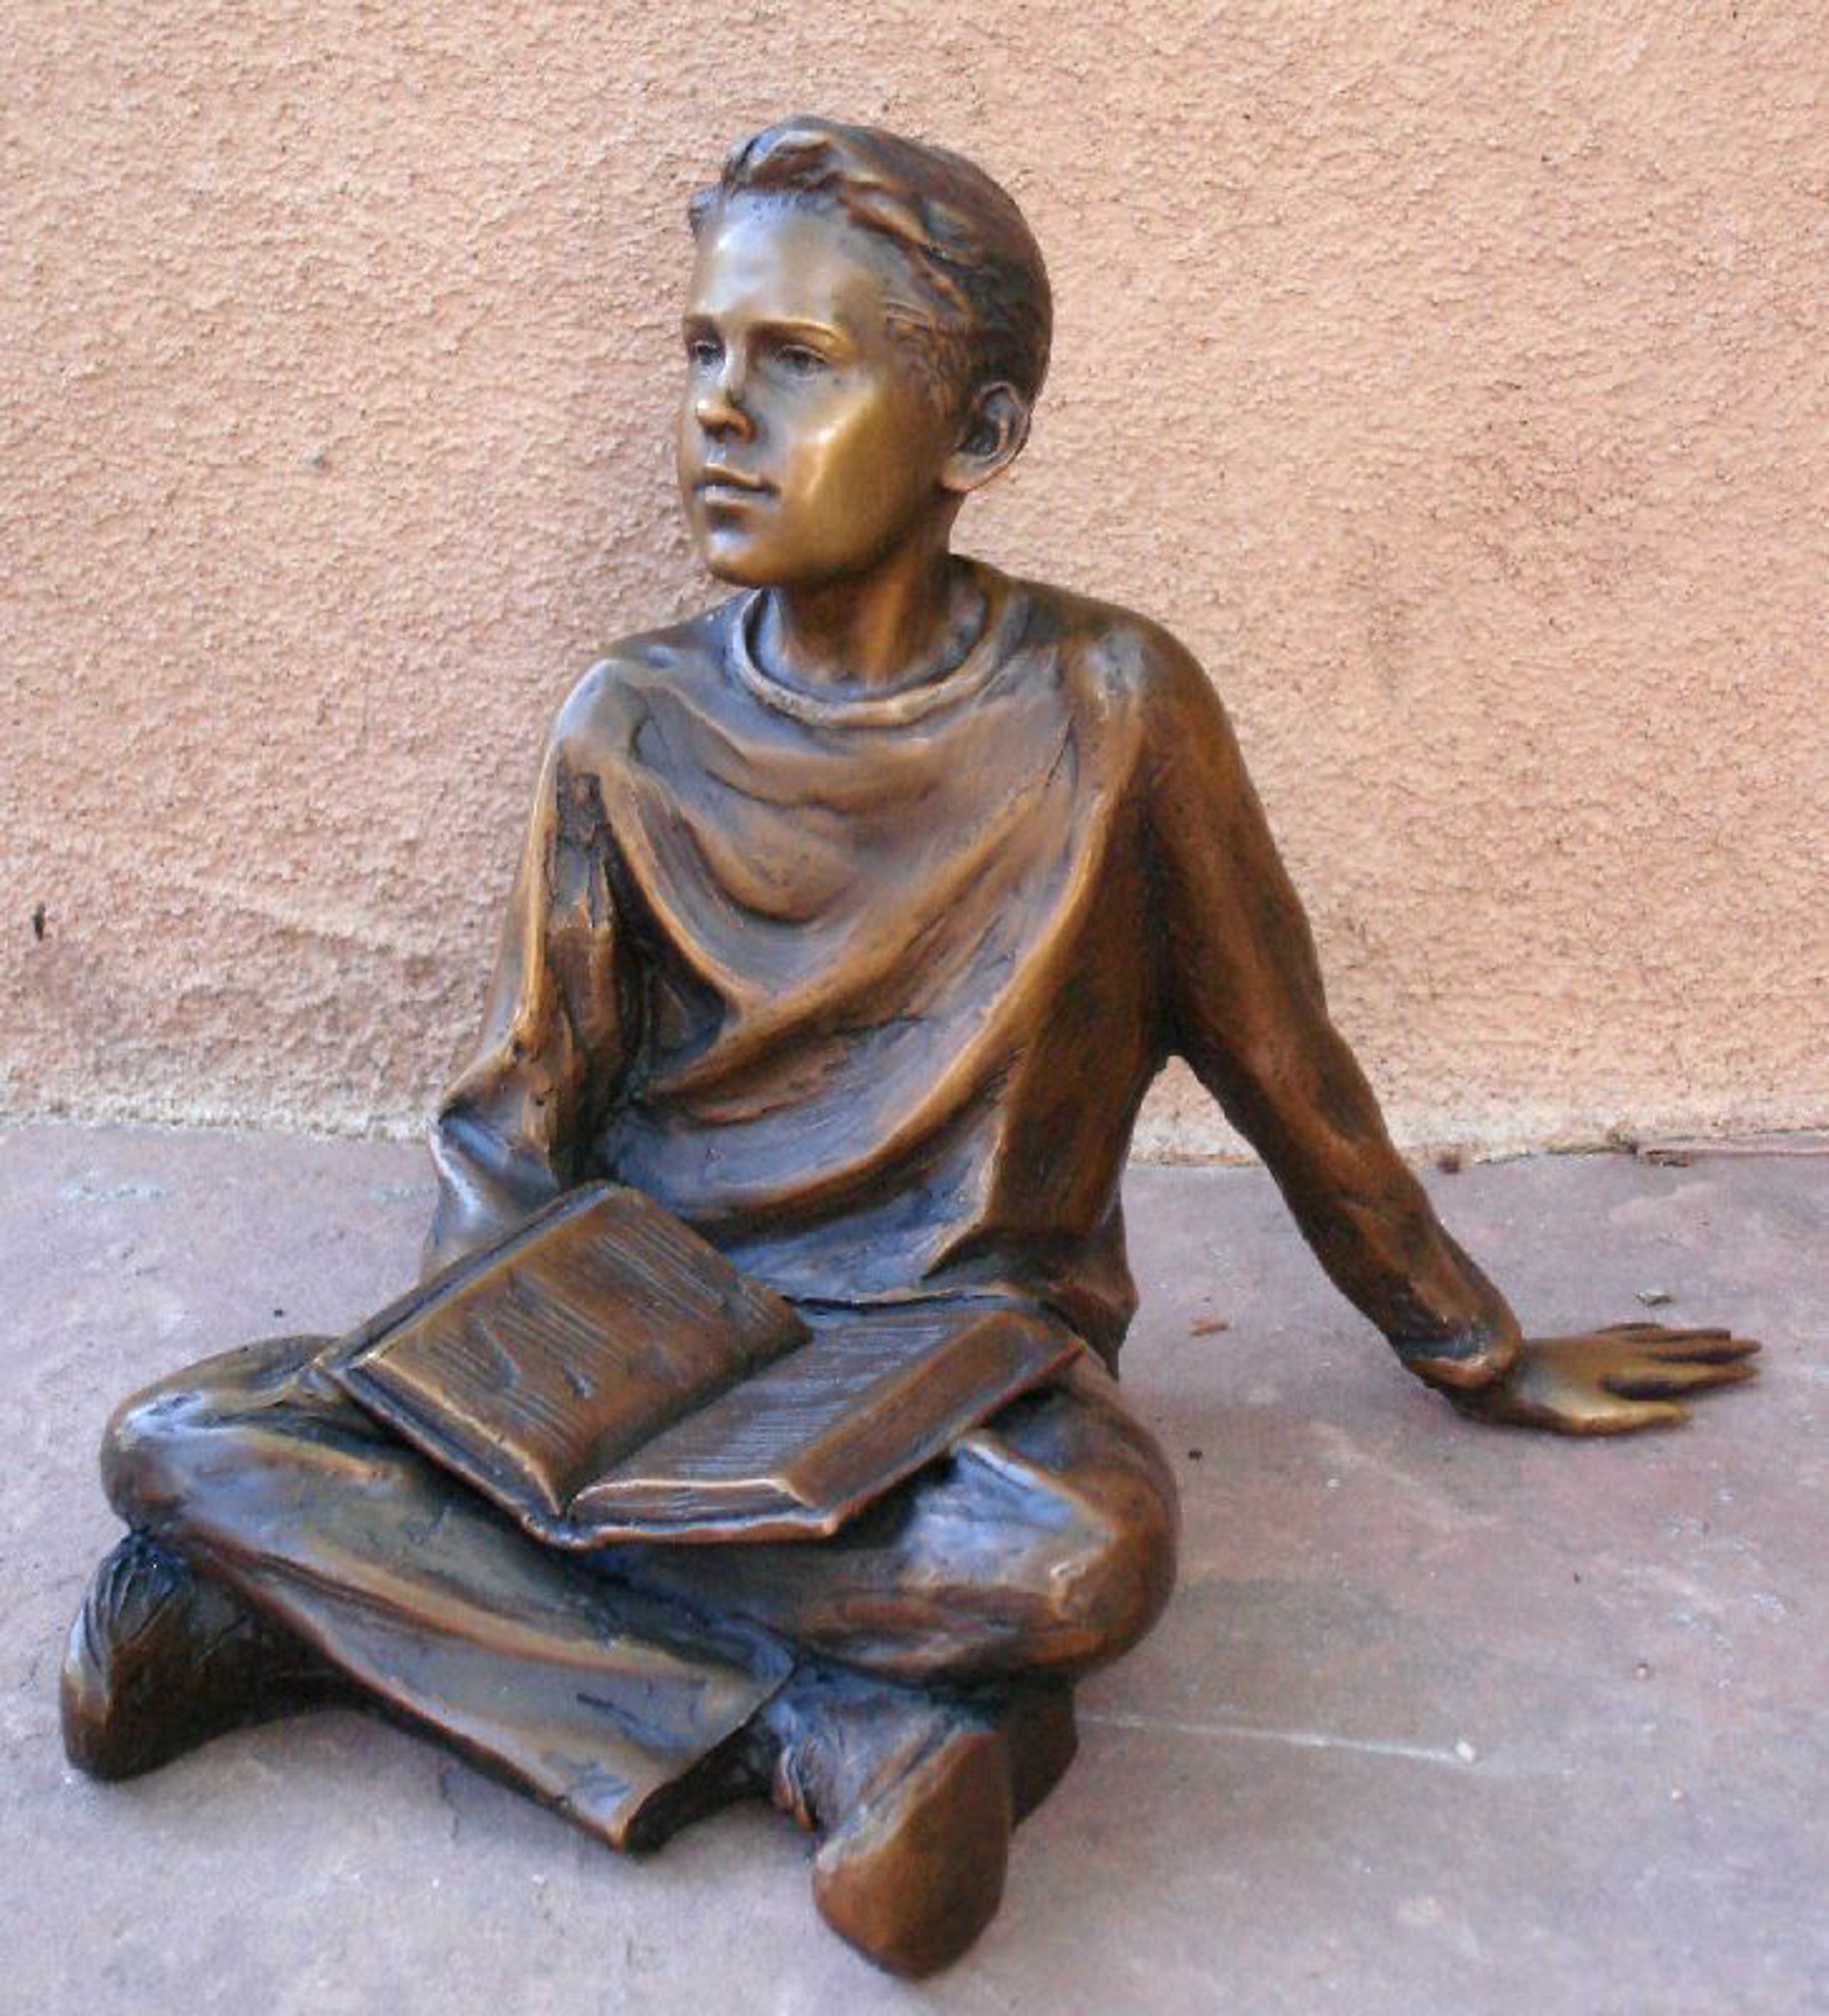 Man of the Future  maquette by Karl Jensen (sculptor)